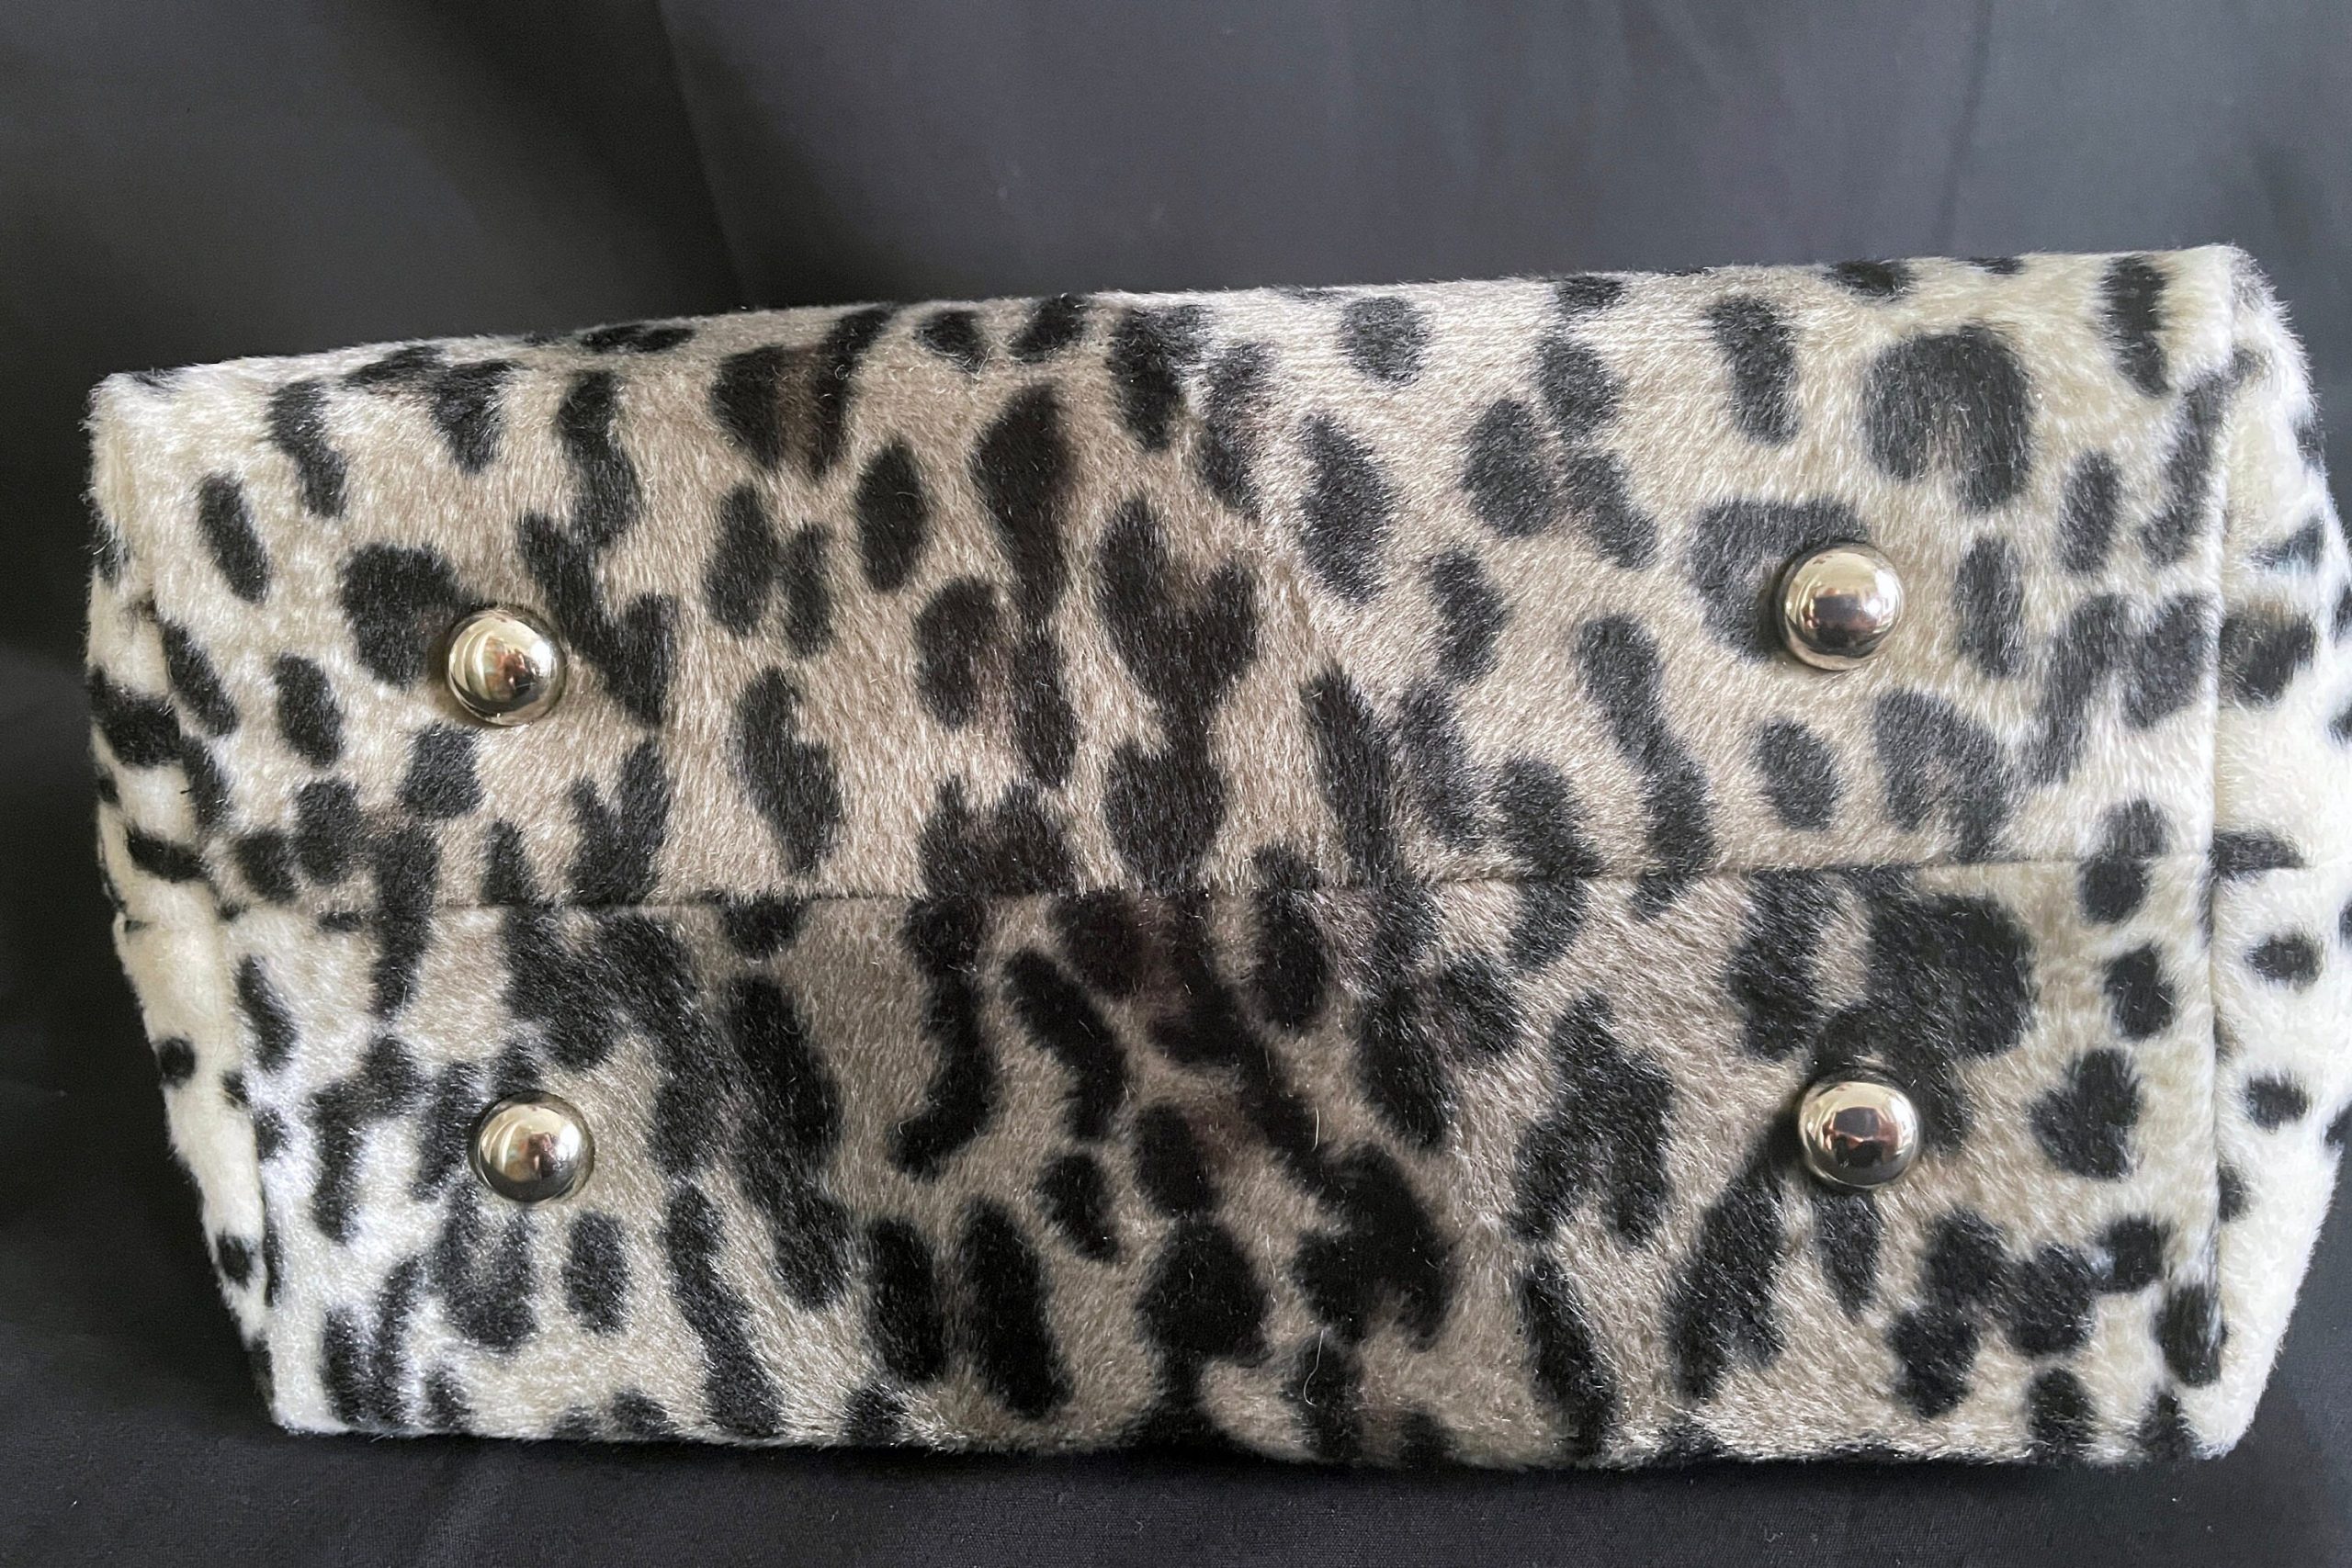 Clutch Purse in Soft Snow Leopard Print Faux Fur with Silver Metal Frame